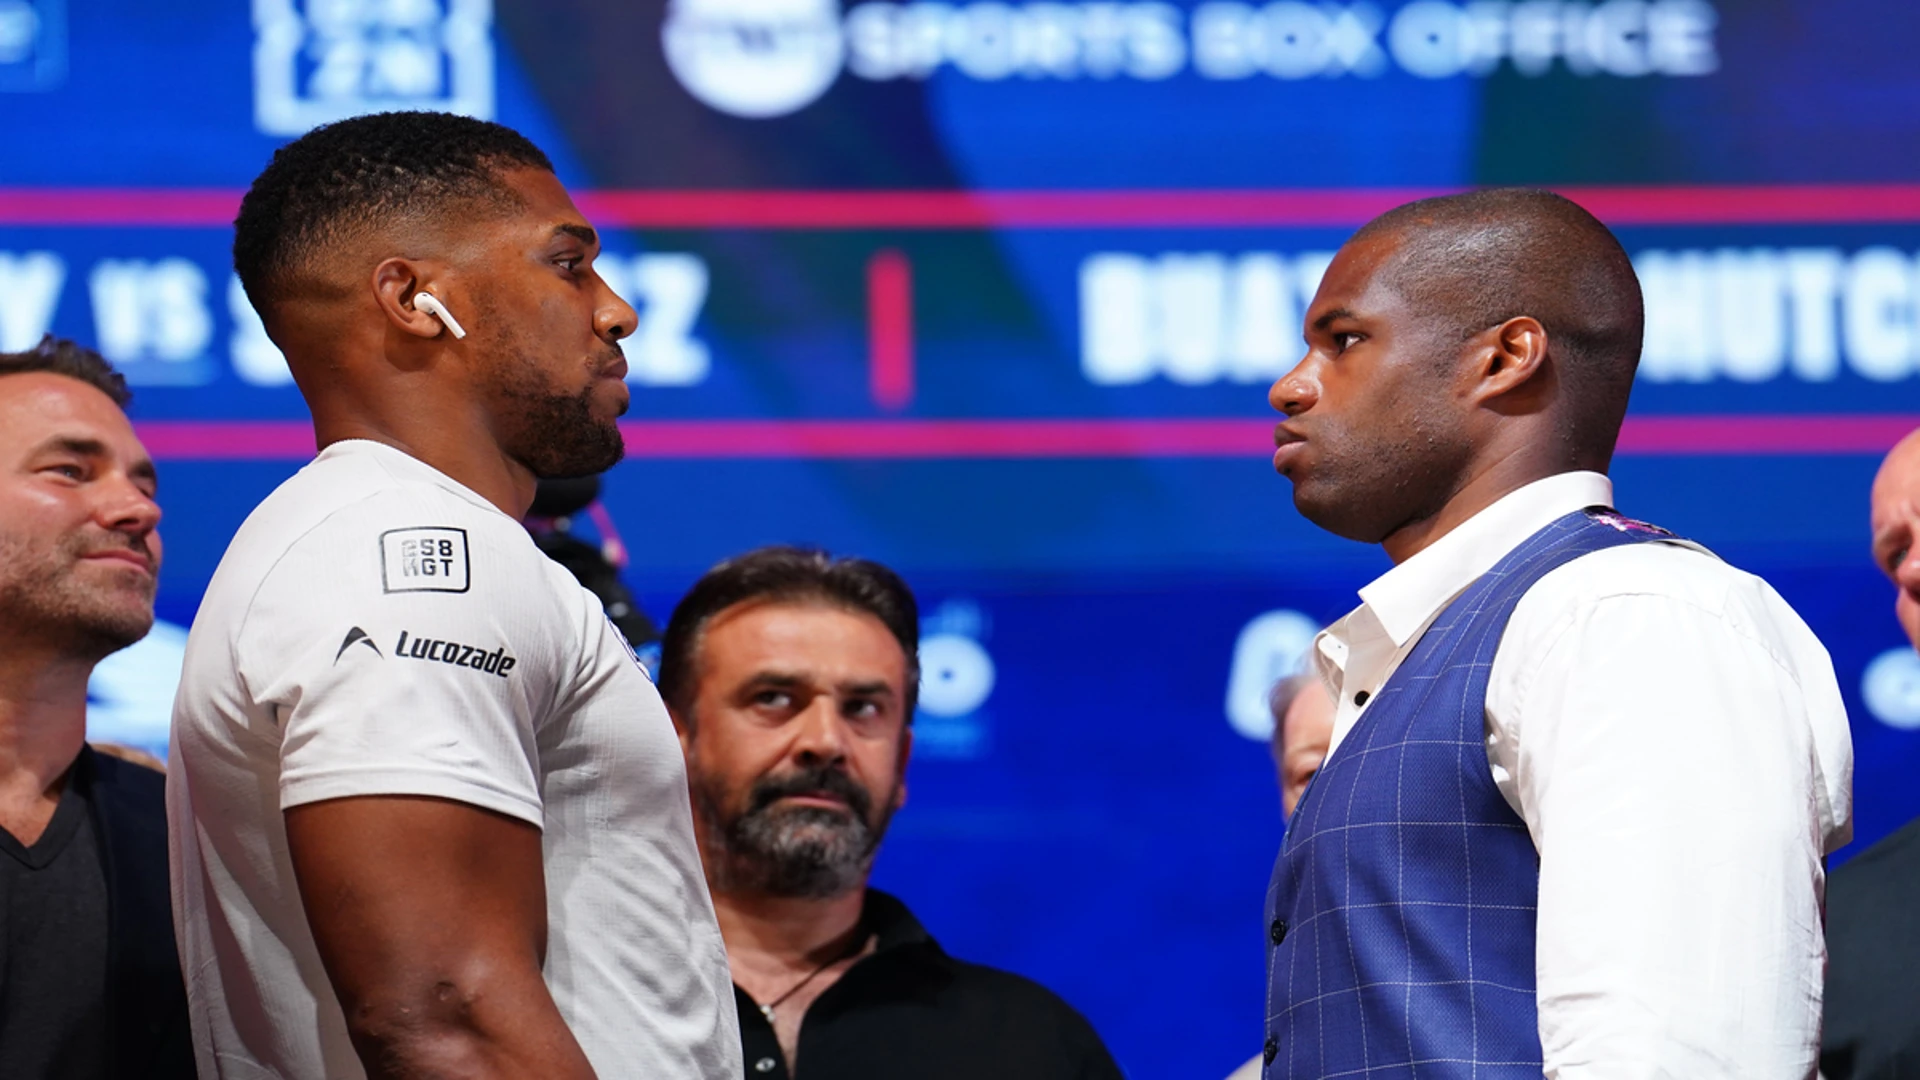 Joshua to fight Dubois for IBF title vacated by Usyk